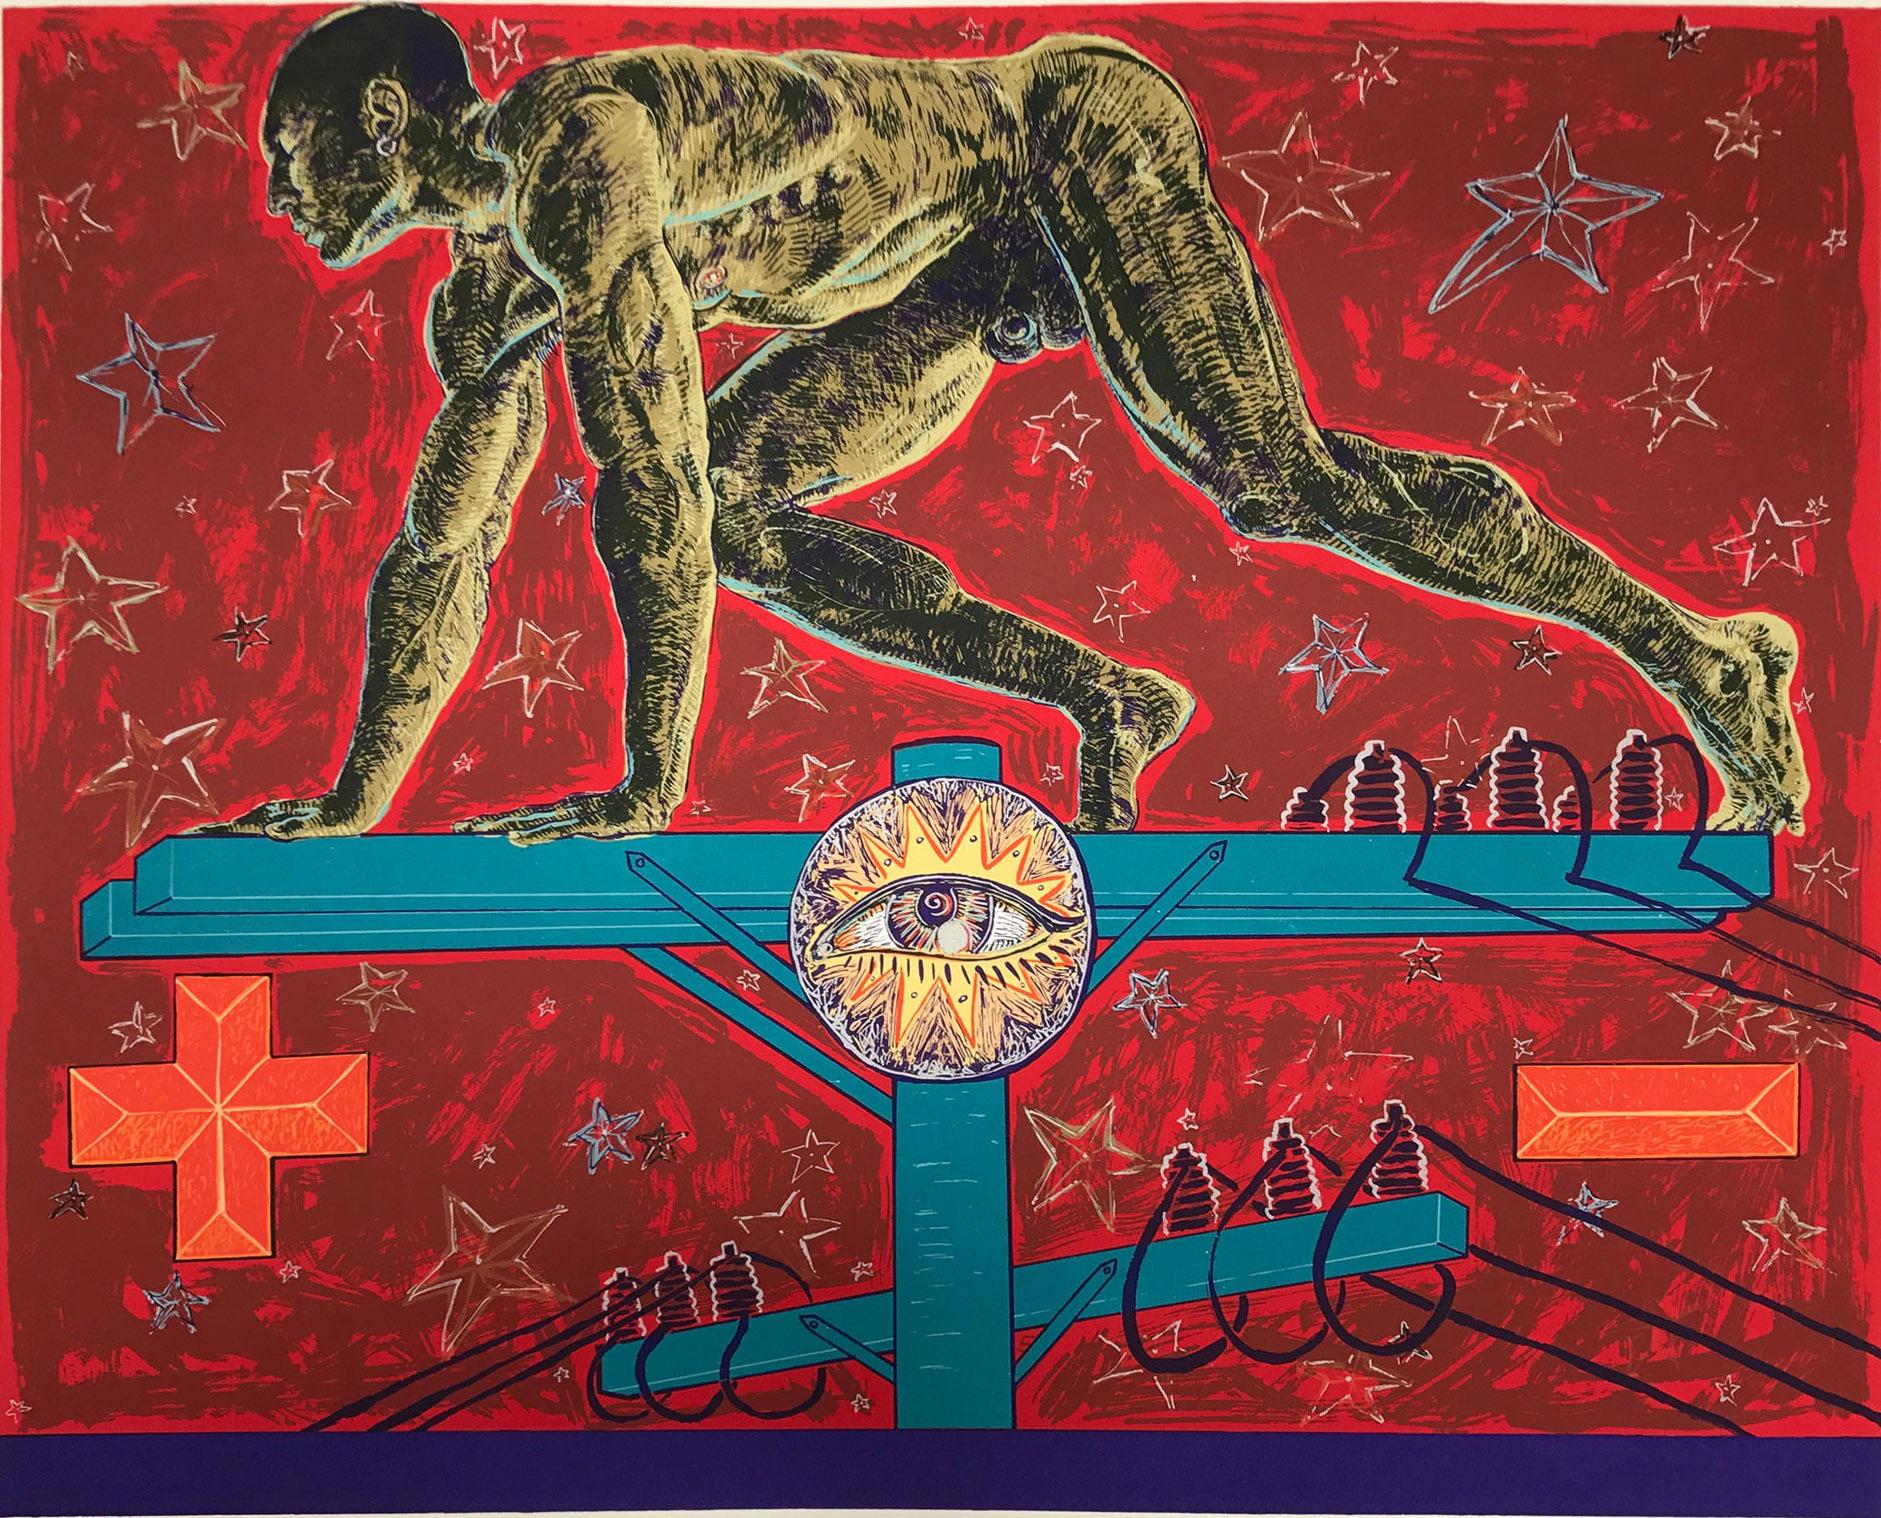 Serigraph of male nude on top of power line,  by gay Chicano artist Miguel Angel Reyes. Signed and numbered,  edition of 61. Image refers to the tensions of being gay and from a traditional Mexican family on one side, and the emerging danger of AIDS